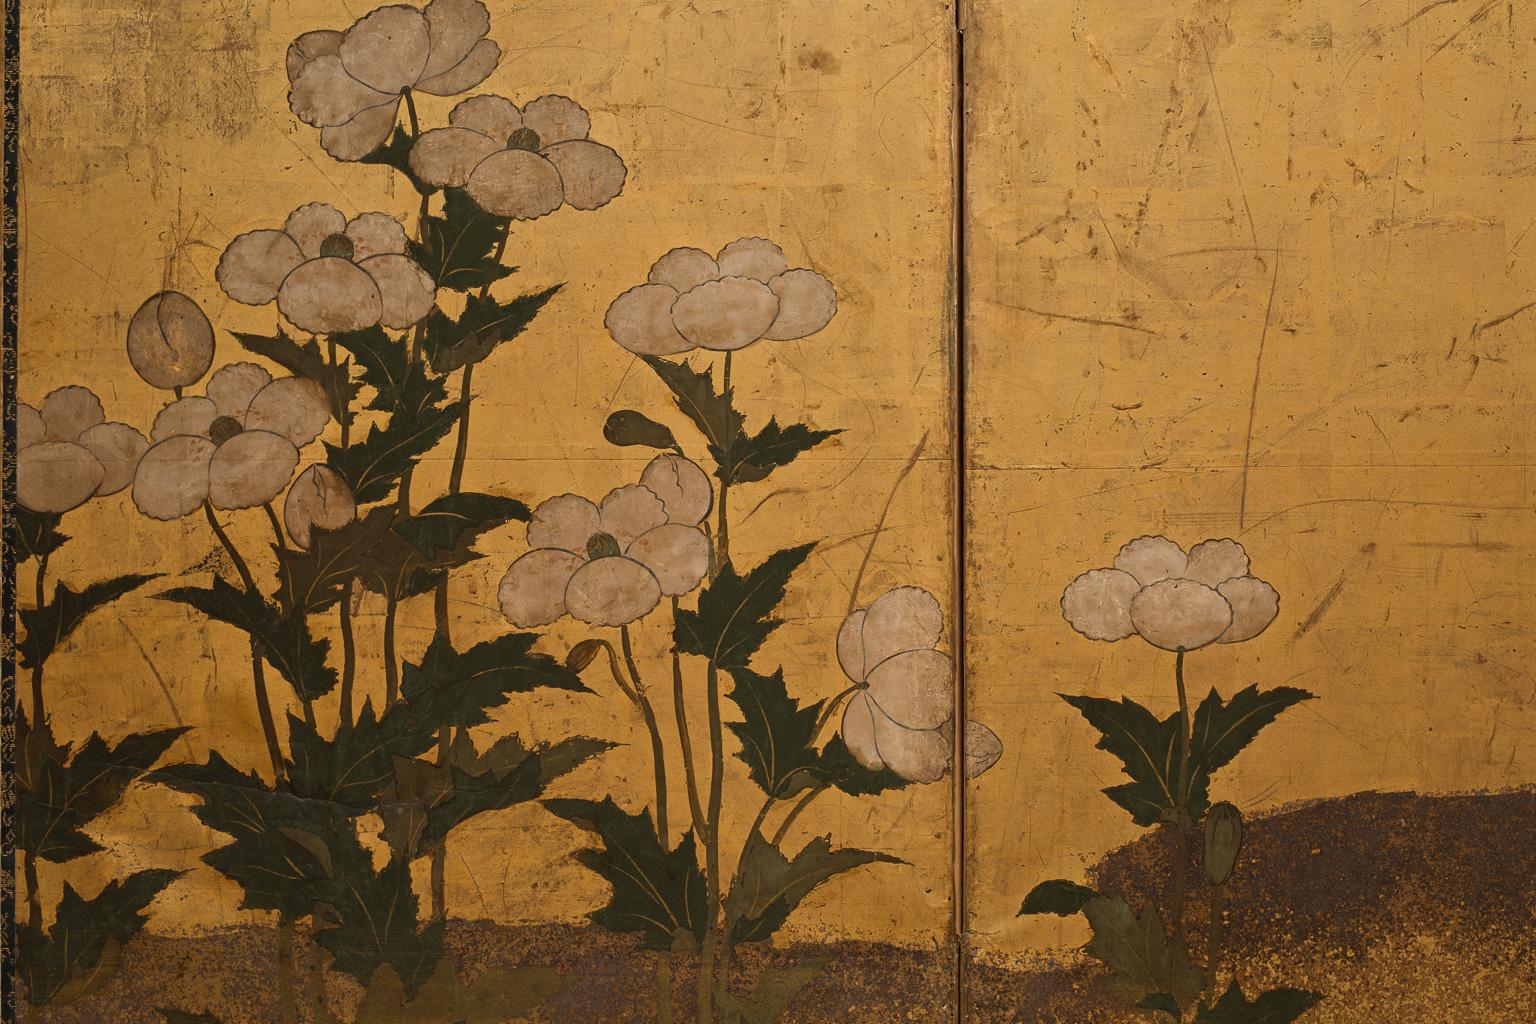 Painted Japanese Rinpa School Folding Screen with Poppies, 17th Century